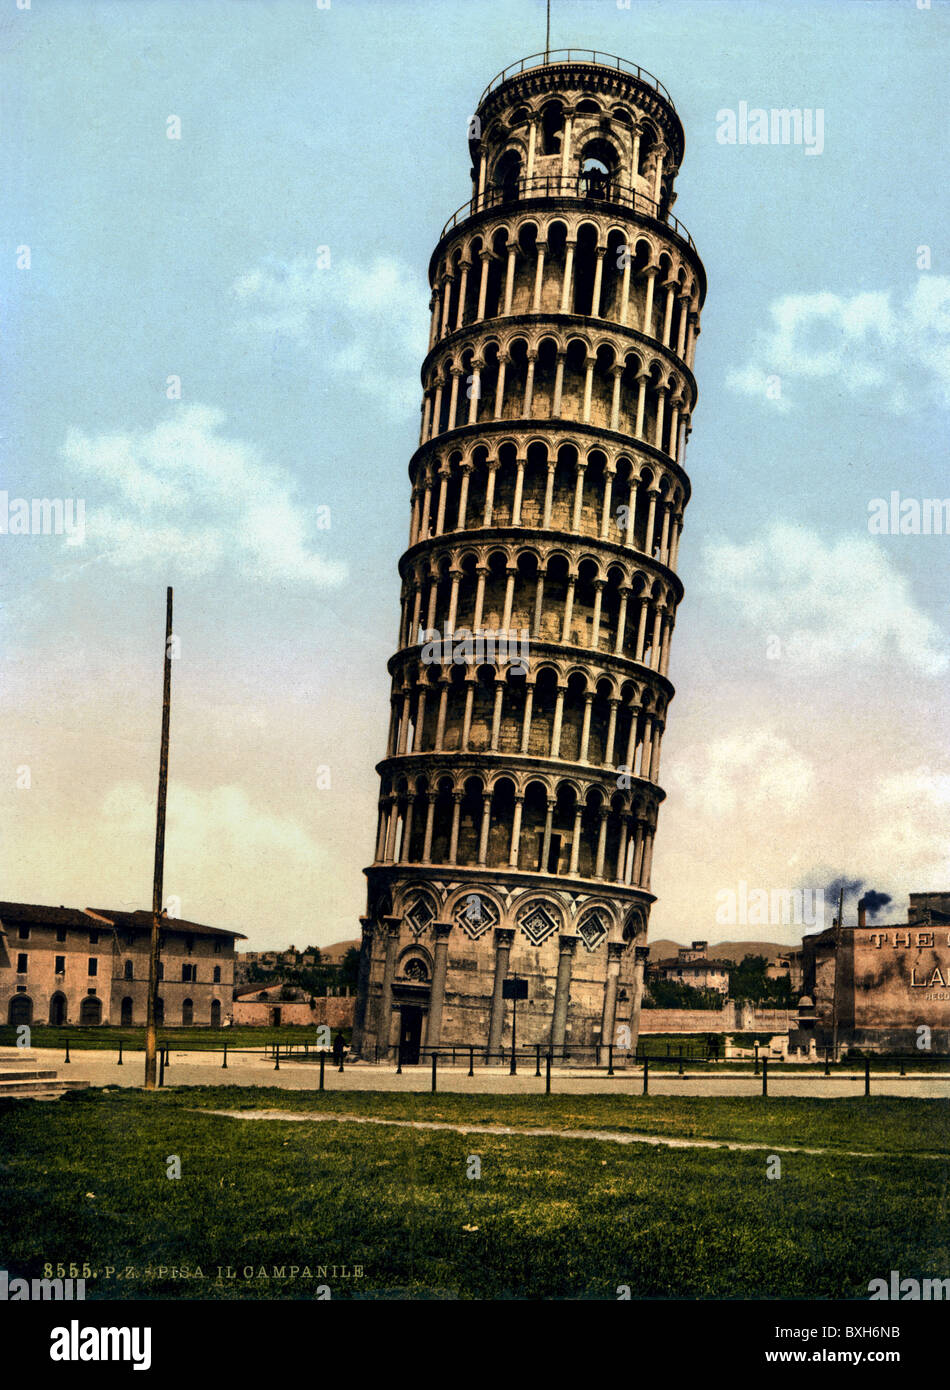 geography / travel, Italy, Pisa, Pisa, the Leaning Tower of Pisa, Campanile, build: 1173, Italy, circa 1899, historic, historical, 1890s, 19th century, landmark, sight, sights, building, buildings, architecture, exterior view, UNESCO World Cultural Heritage Site / Sites, at the turn of the 19th / 20th century, Photochrom, polychrome lithograph, middle ages, medieval, people, Additional-Rights-Clearences-Not Available Stock Photo